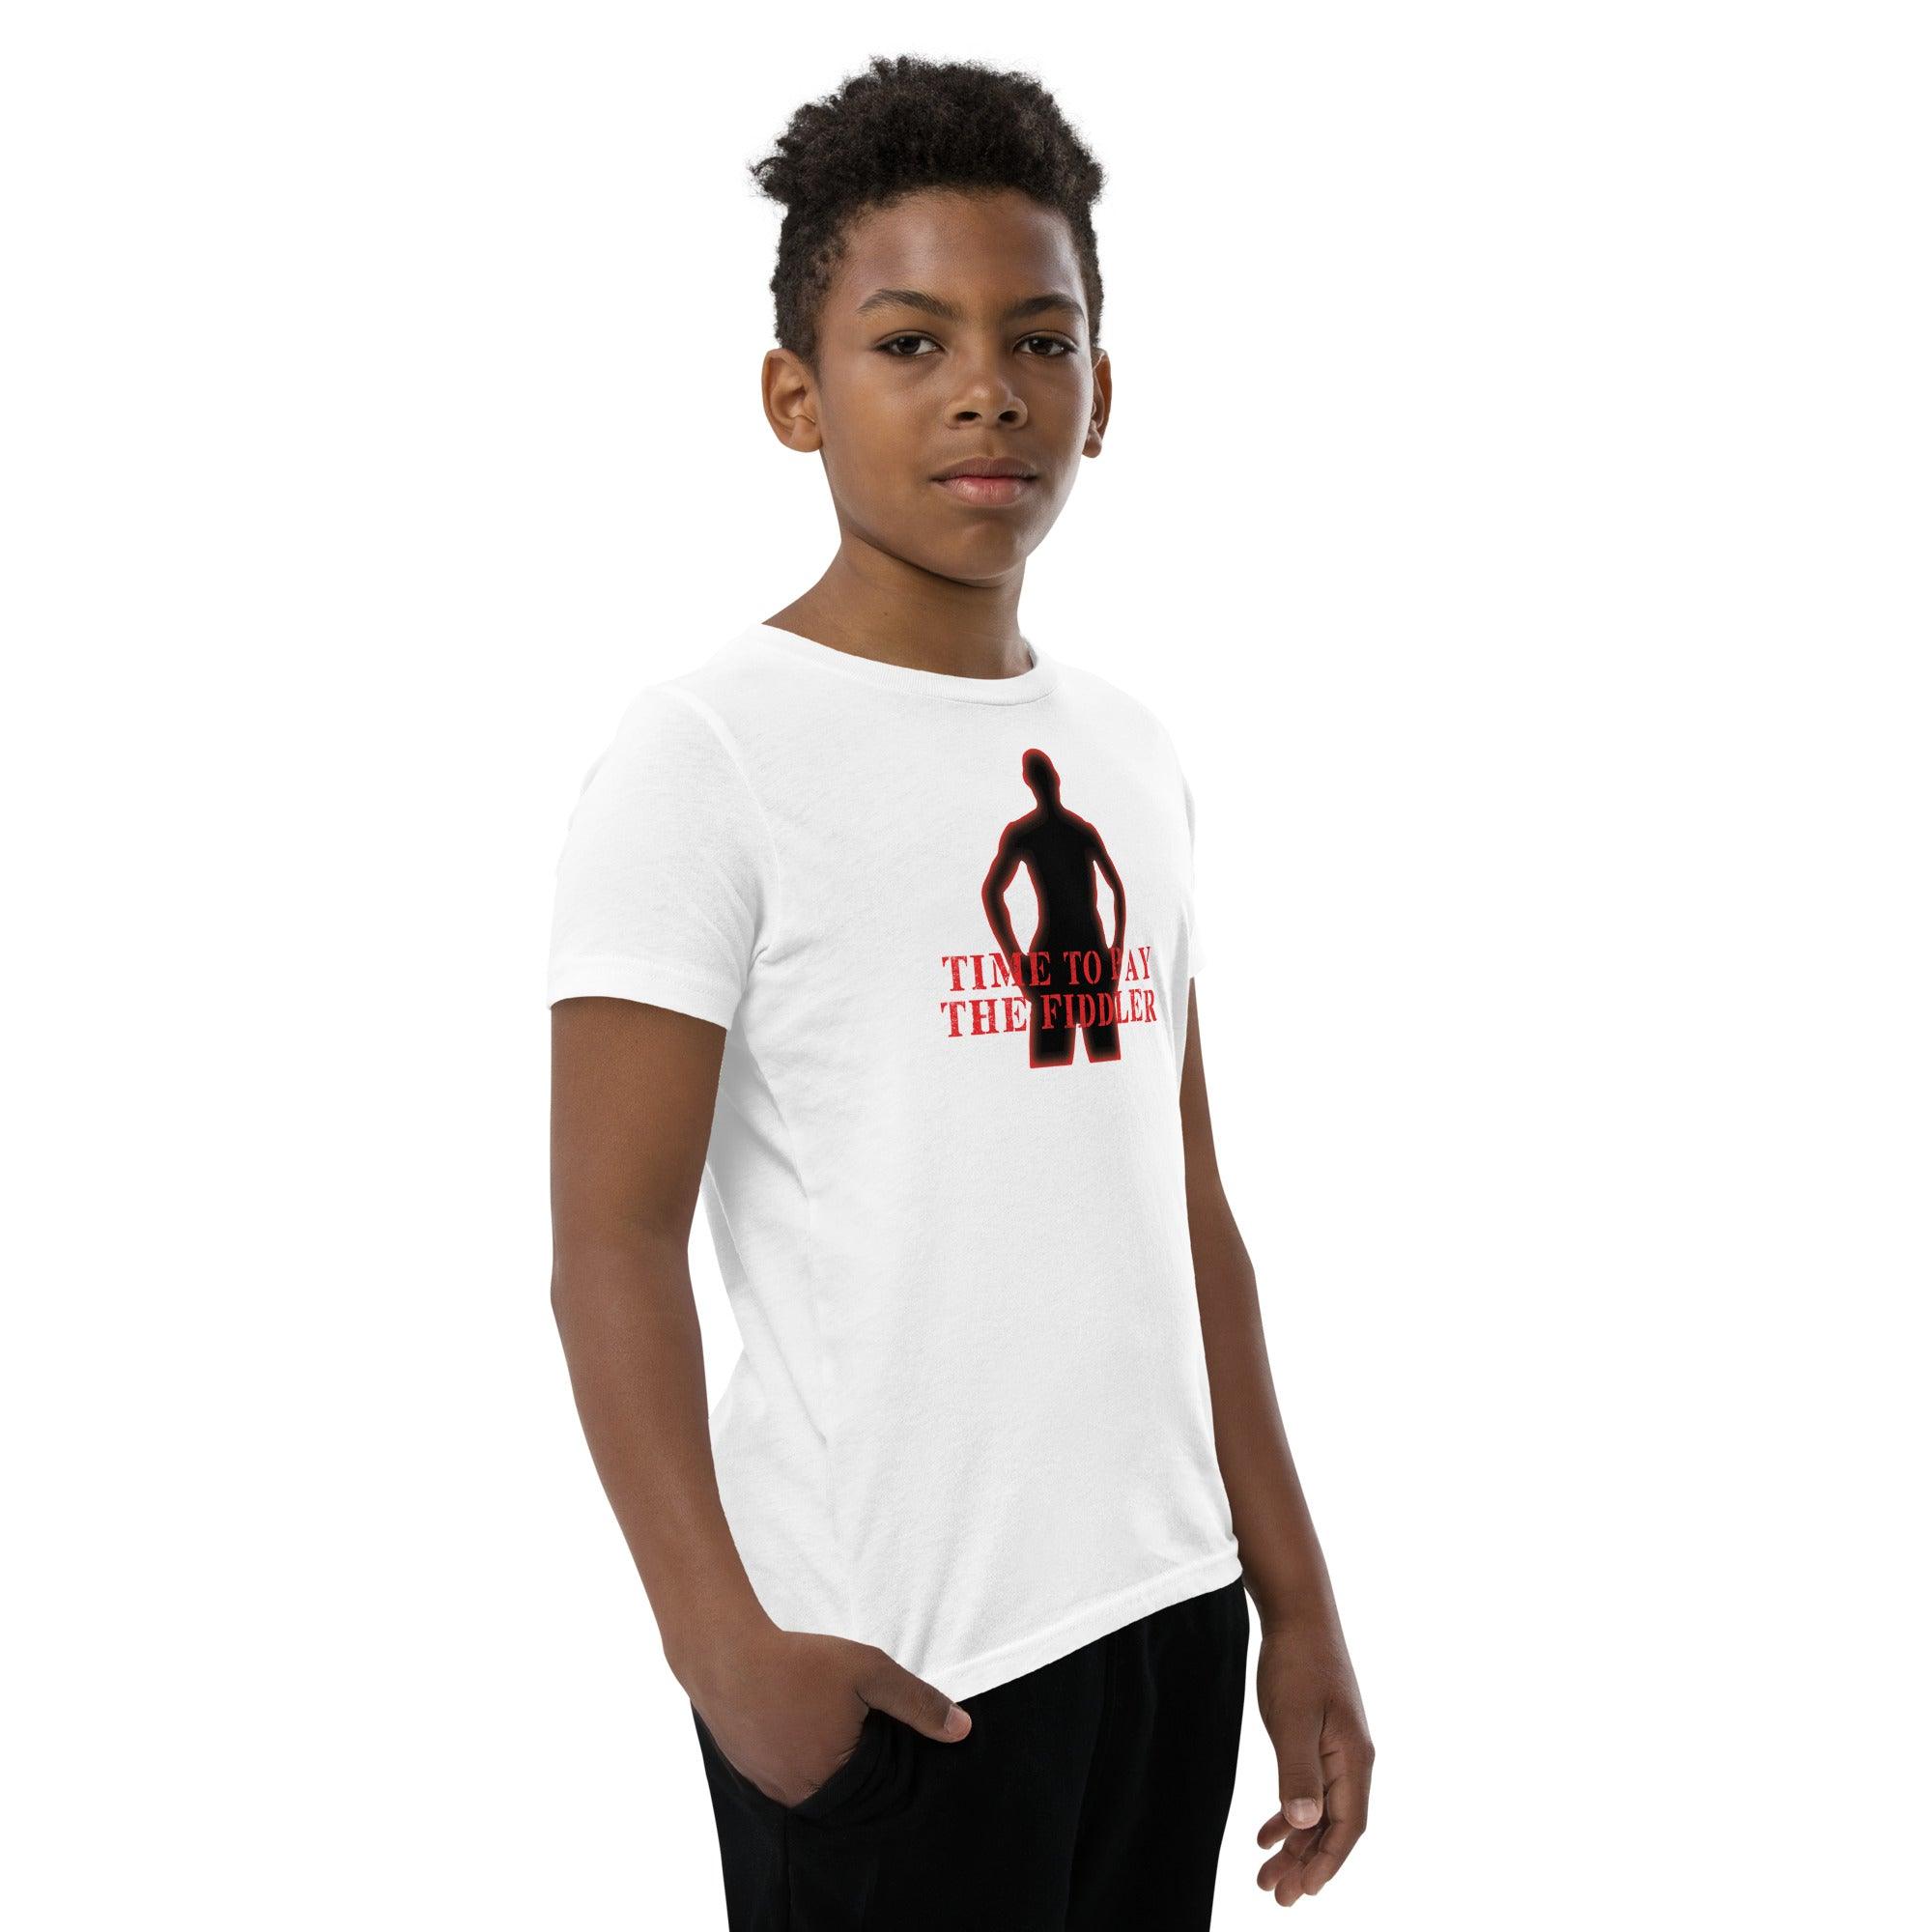 Time To Pay The Fiddler Youth Short Sleeve T-Shirt VAWDesigns